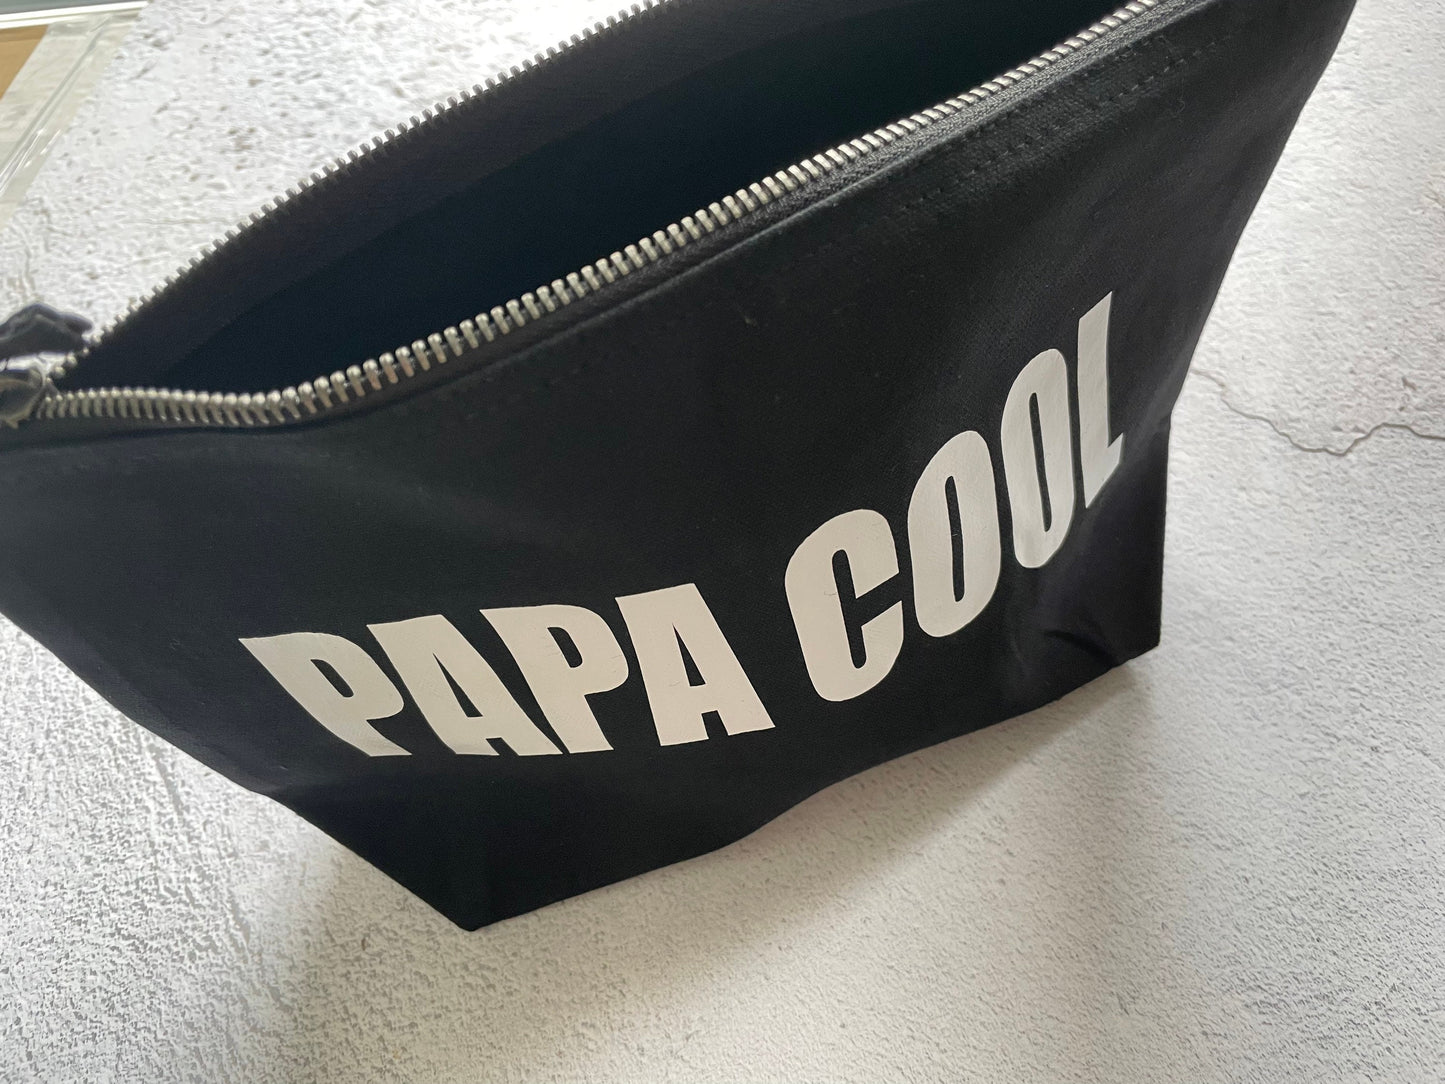 Papa cool, dad gift, toiletry case, Father’s Day gift, gift for men, cool dad gift, papa gifts, black pouch bag, father of the groom gifts